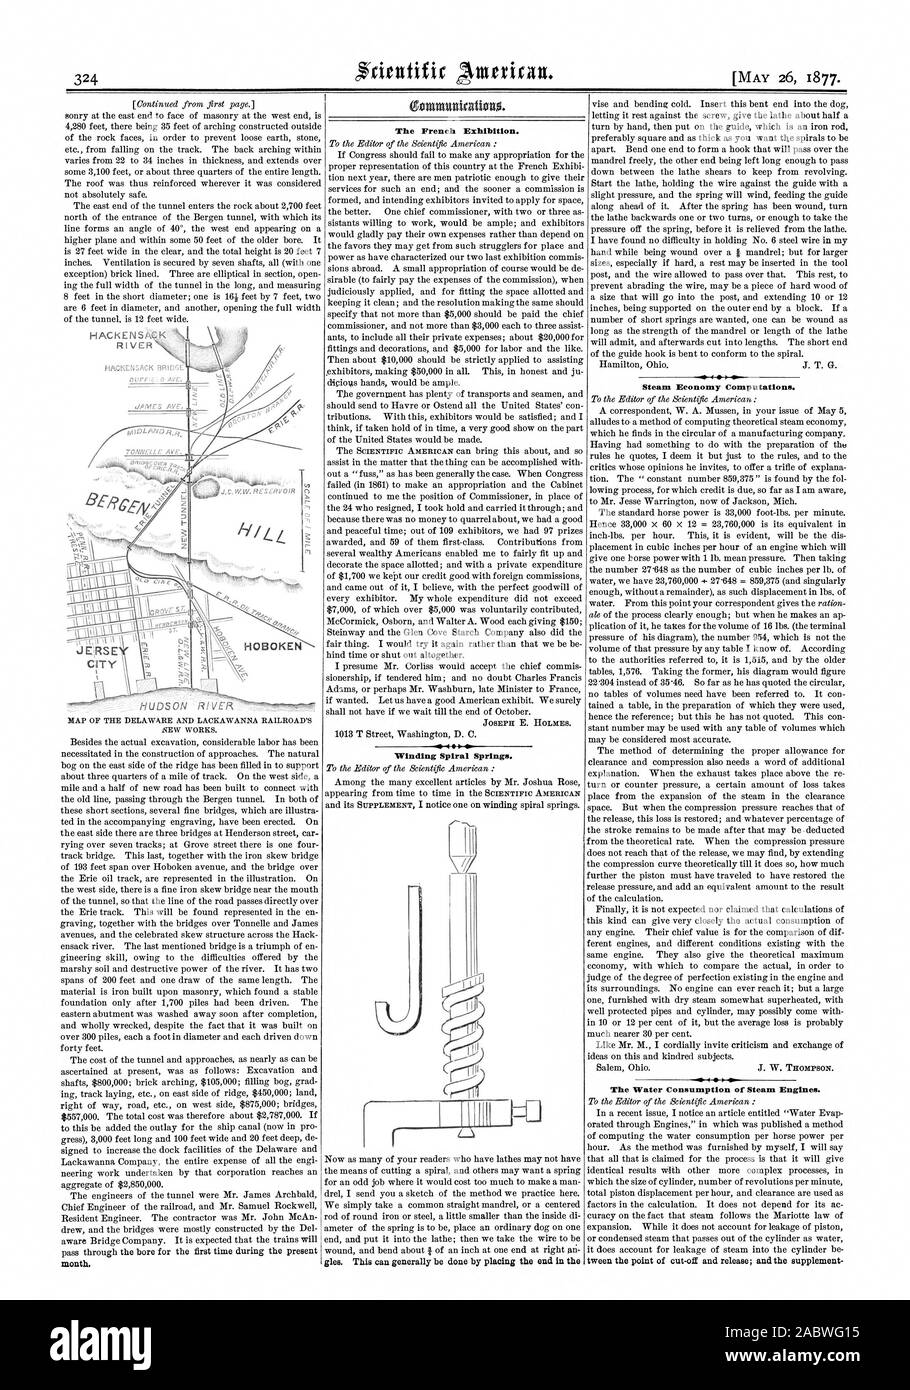 HOBOKEN MAP OF THE DELAWARE AND LACKAWANNA RAILROAD'S NEW WORKS. month. The French Exhibition. le 4 Winding Spiral Springs. gles. This can generally be done by placing the end in the .0 4  410 Steam Economy Computations. The Water Consumption of Steam Engines. CITY, scientific american, 1877-05-26 Stock Photo